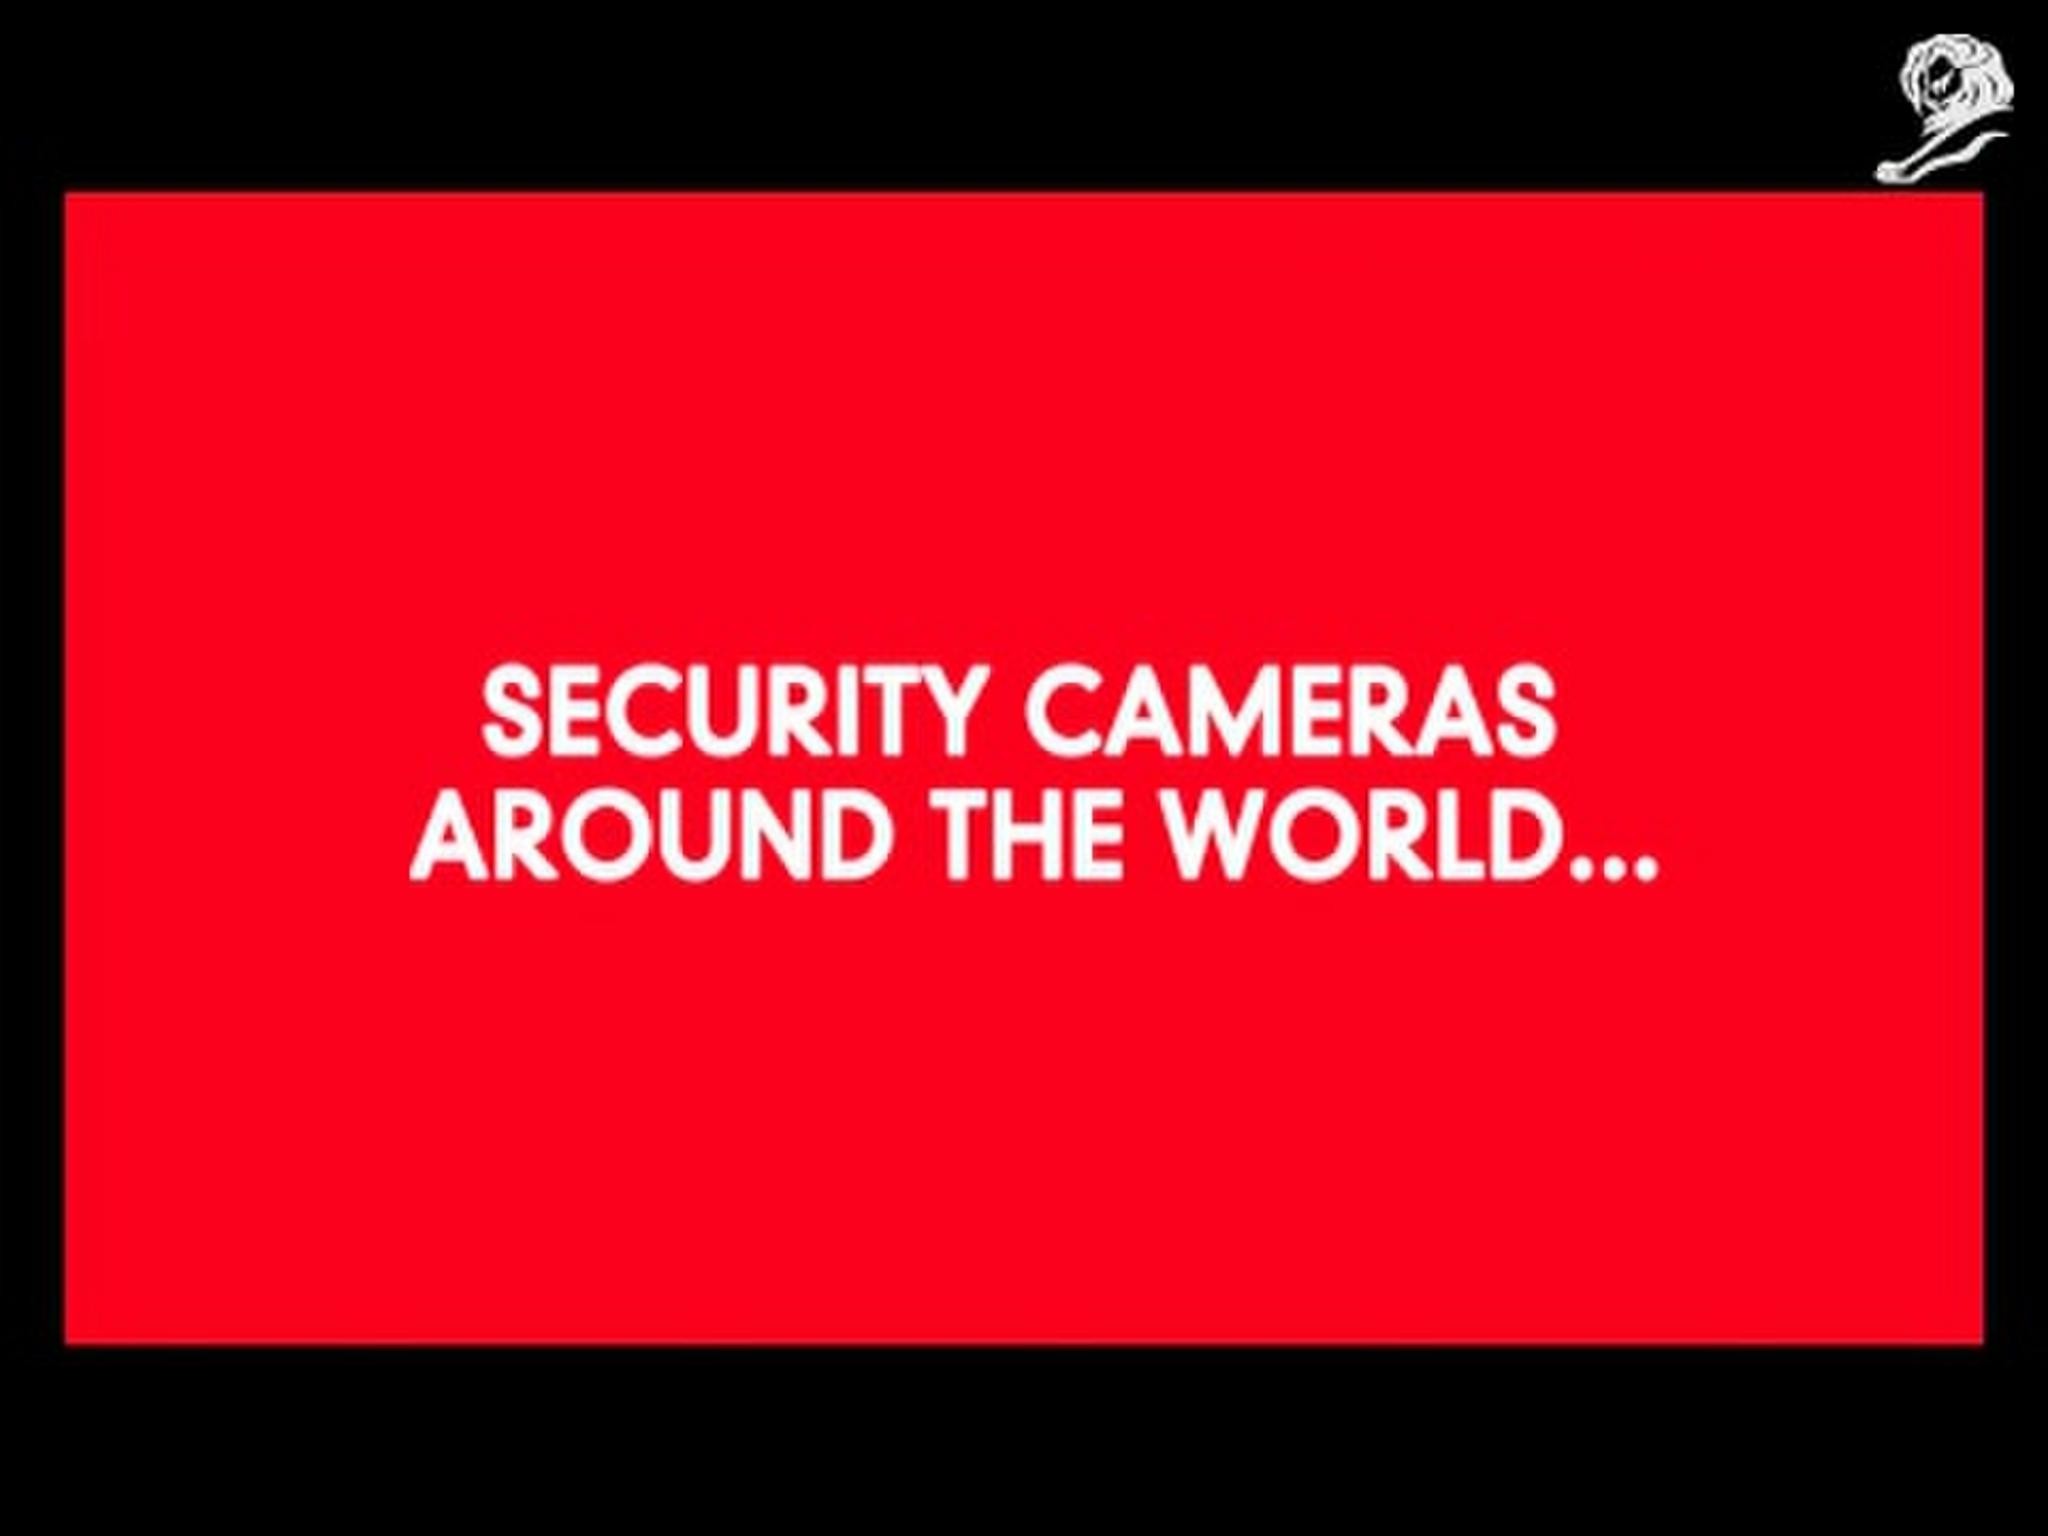 SECURITY CAMS